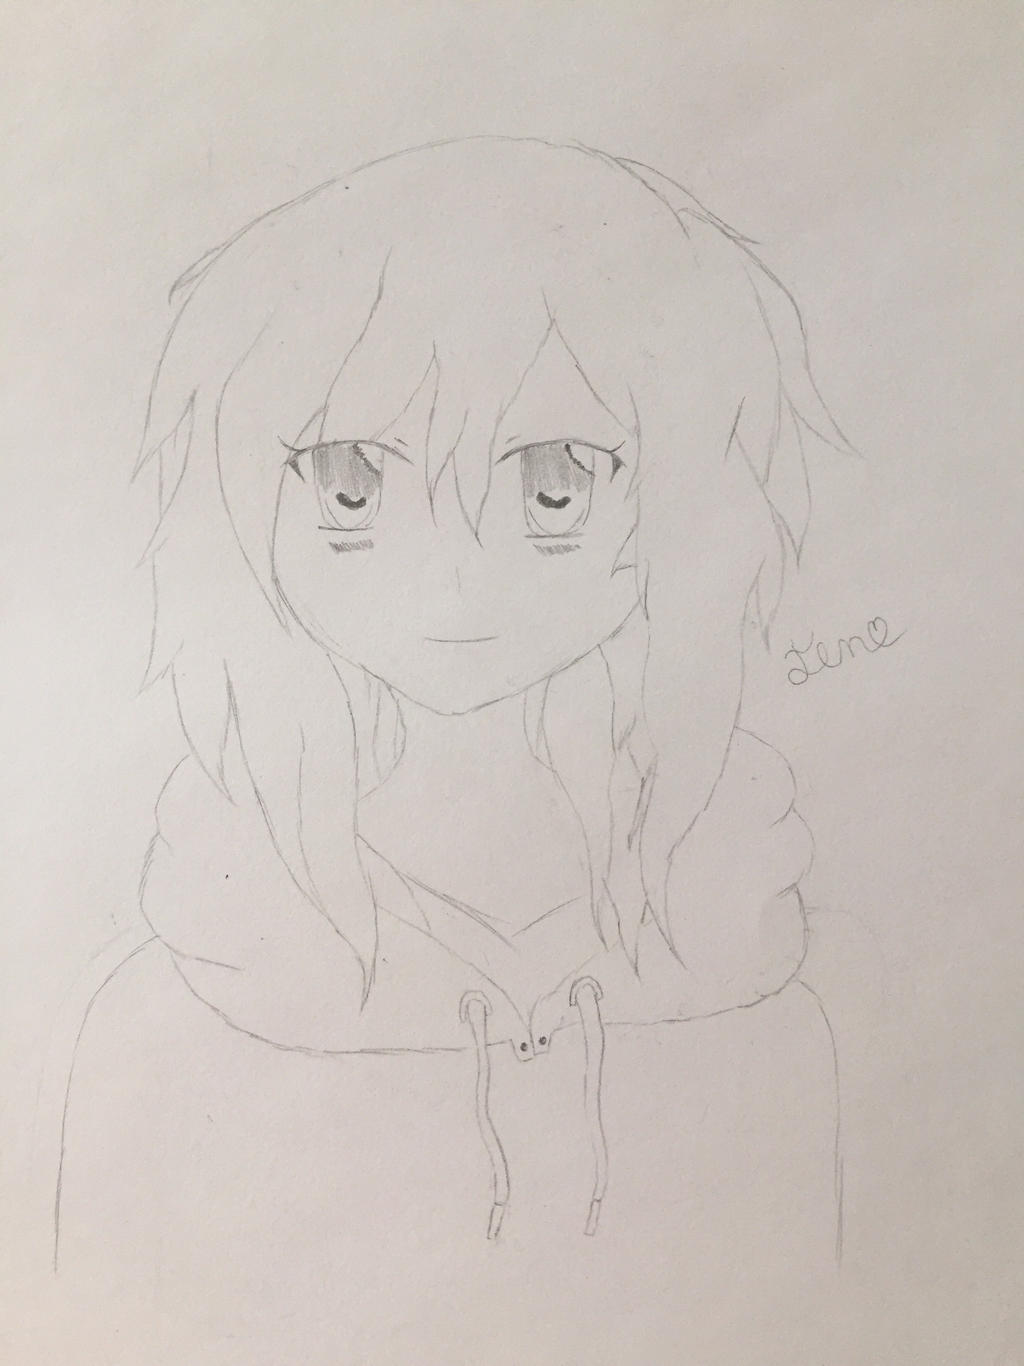 Anime girl with a hoodie on by Nerdycat11 on DeviantArt